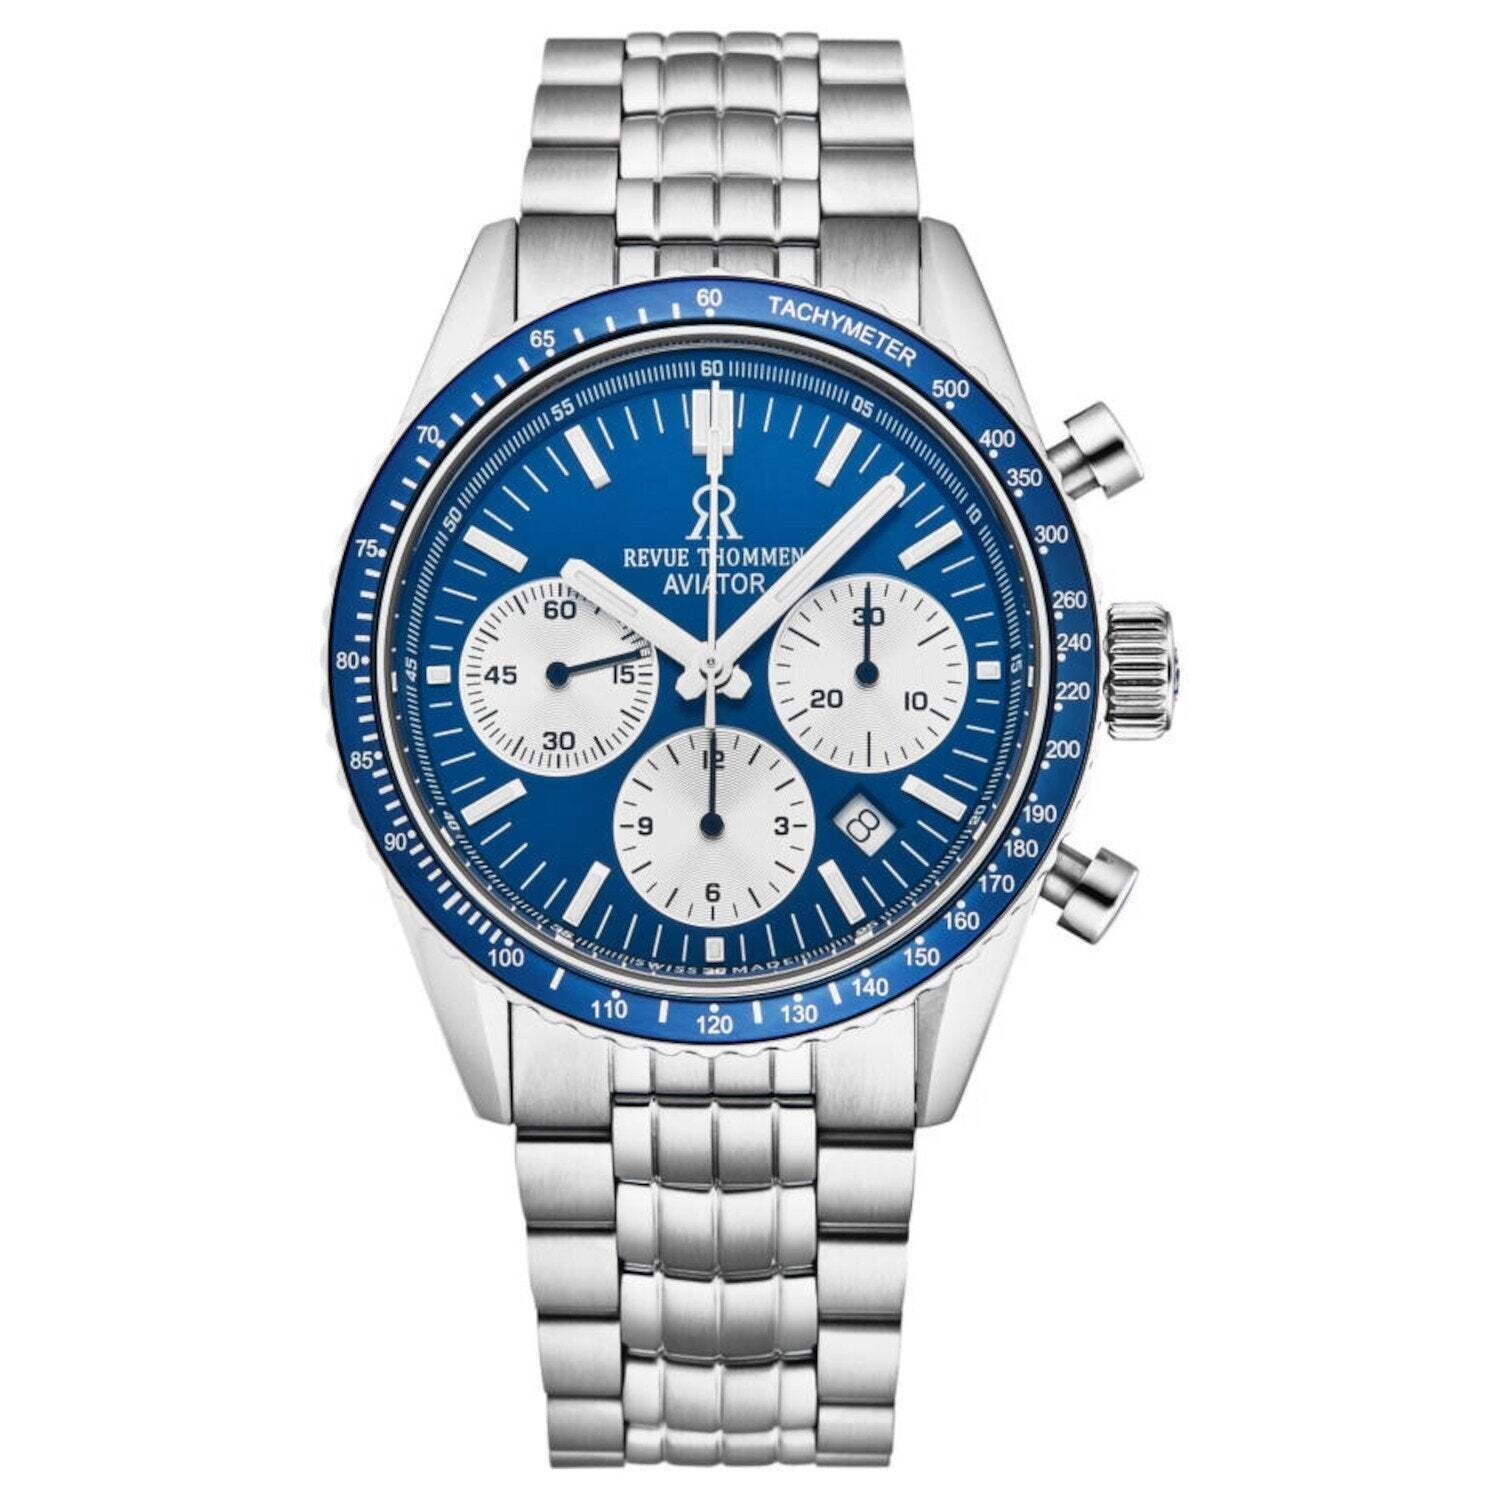 Revue Thommen 17000.6135 Men's 'Aviator' Blue Dial Stainless Steel Chronograph Automatic Watch